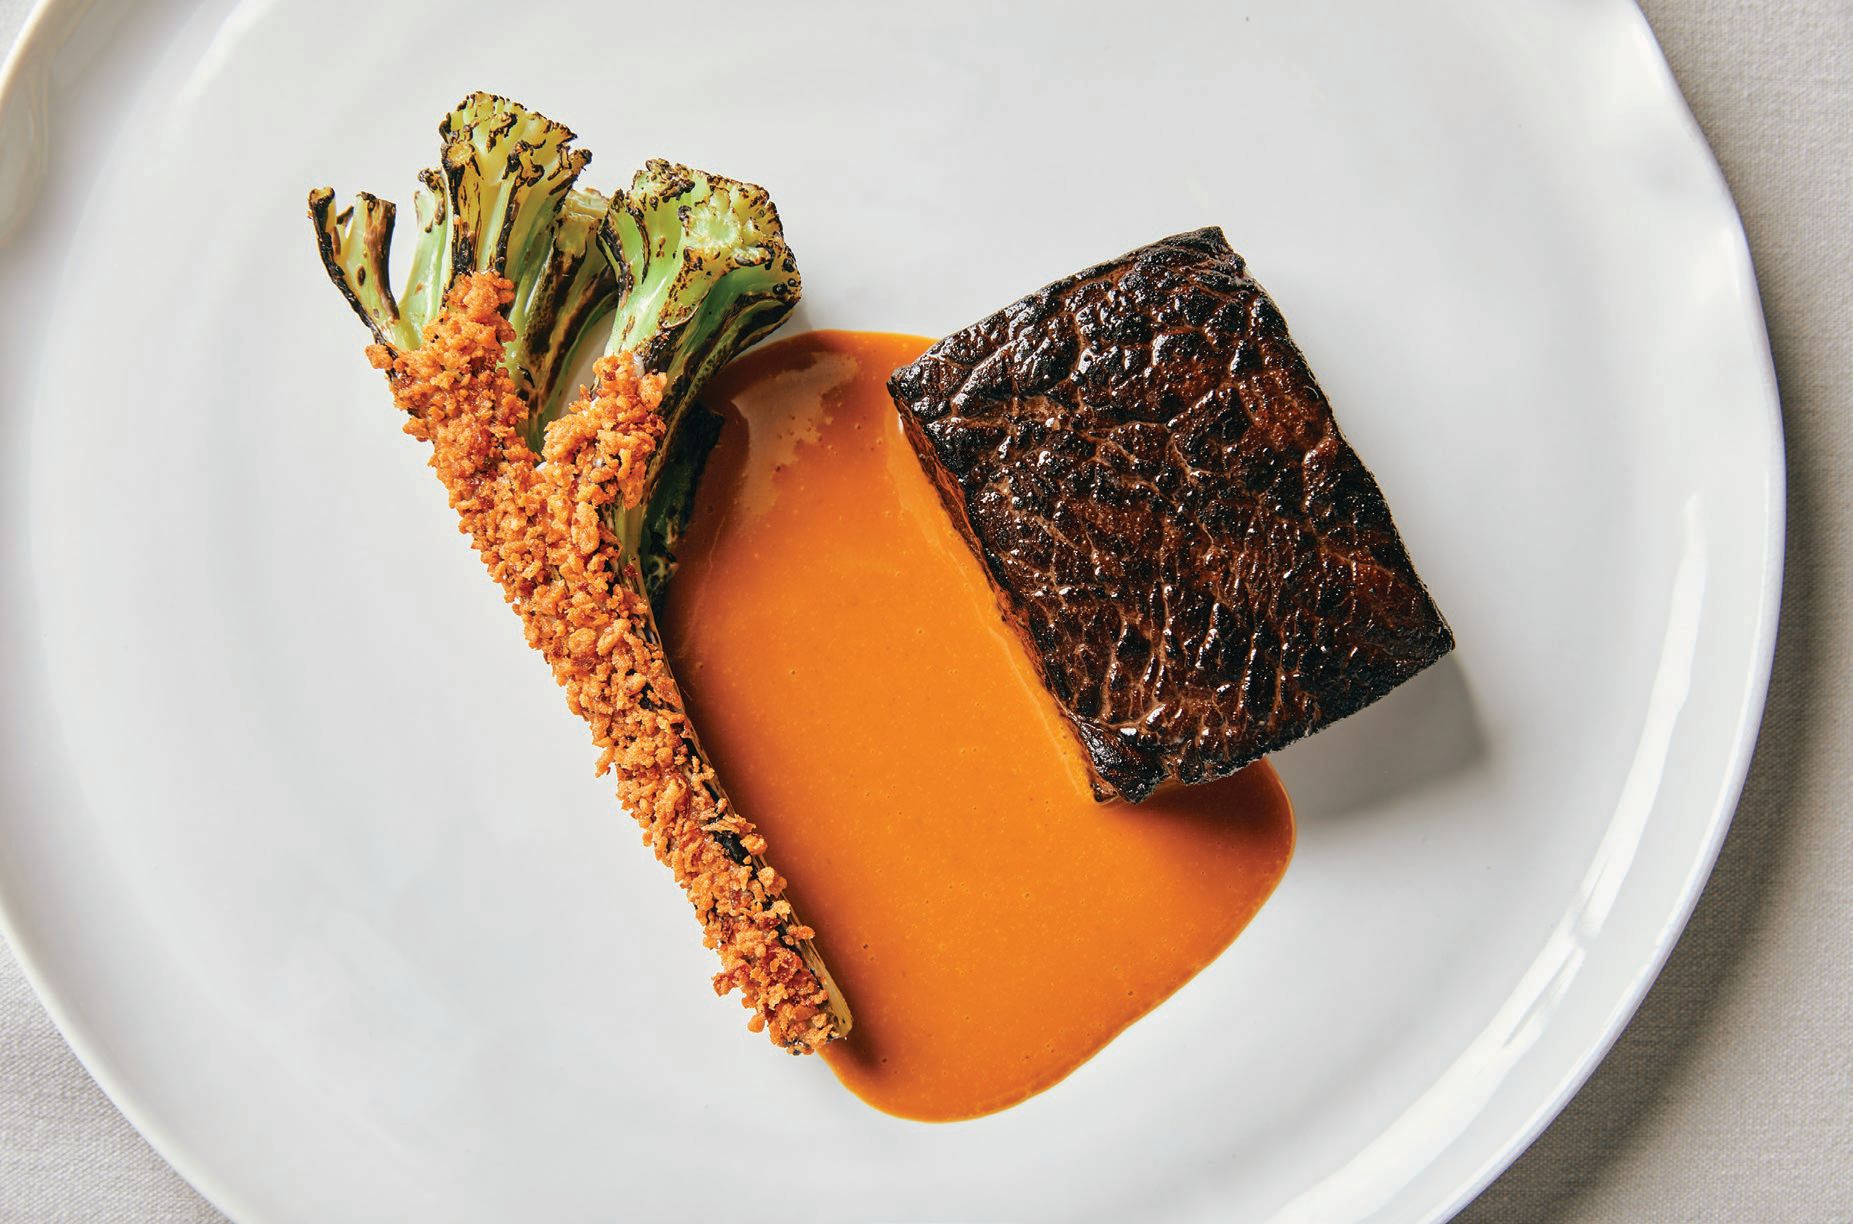 Aged Midwestern beef with caramelized carrot and miso butter and charred brassicas PHOTO BY JACLYN RIVAS